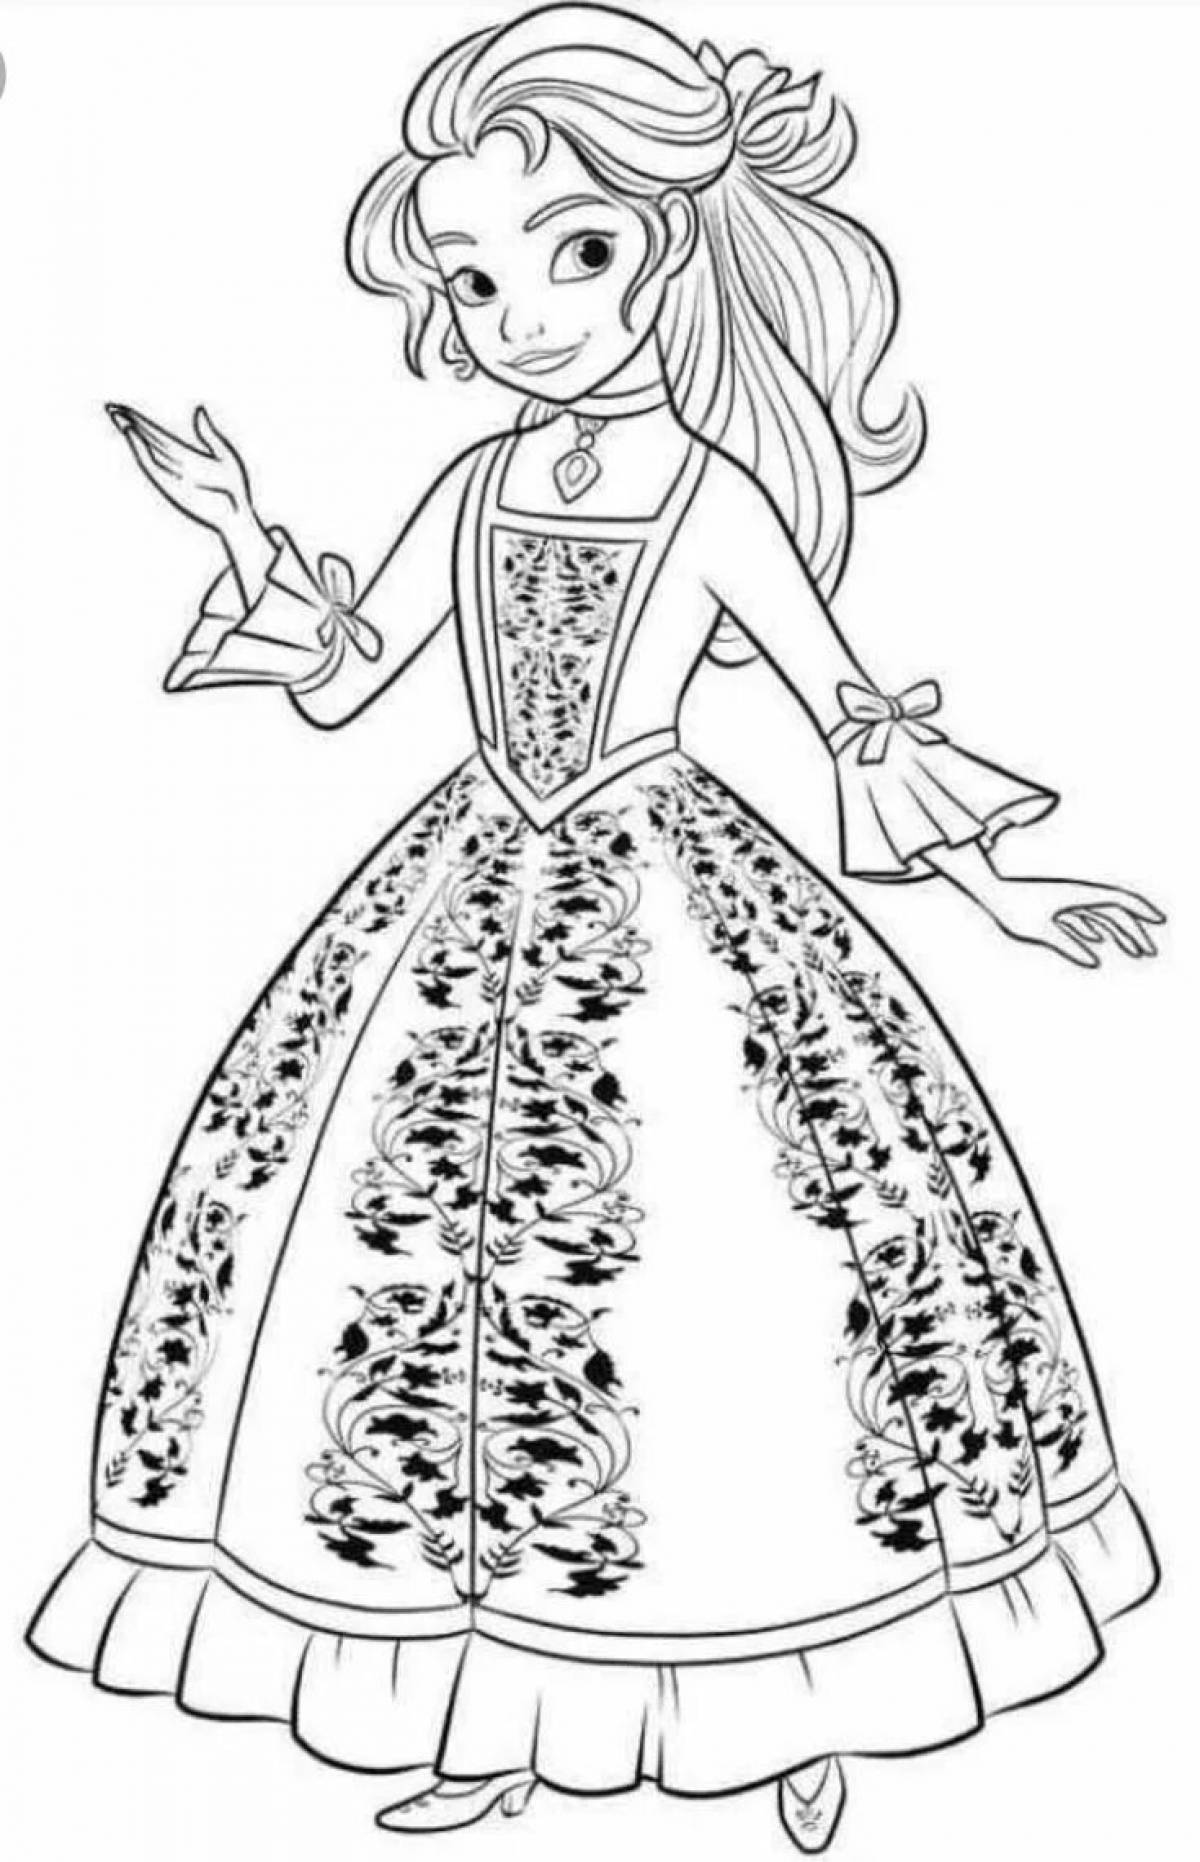 Generous Elena of Avalor coloring page